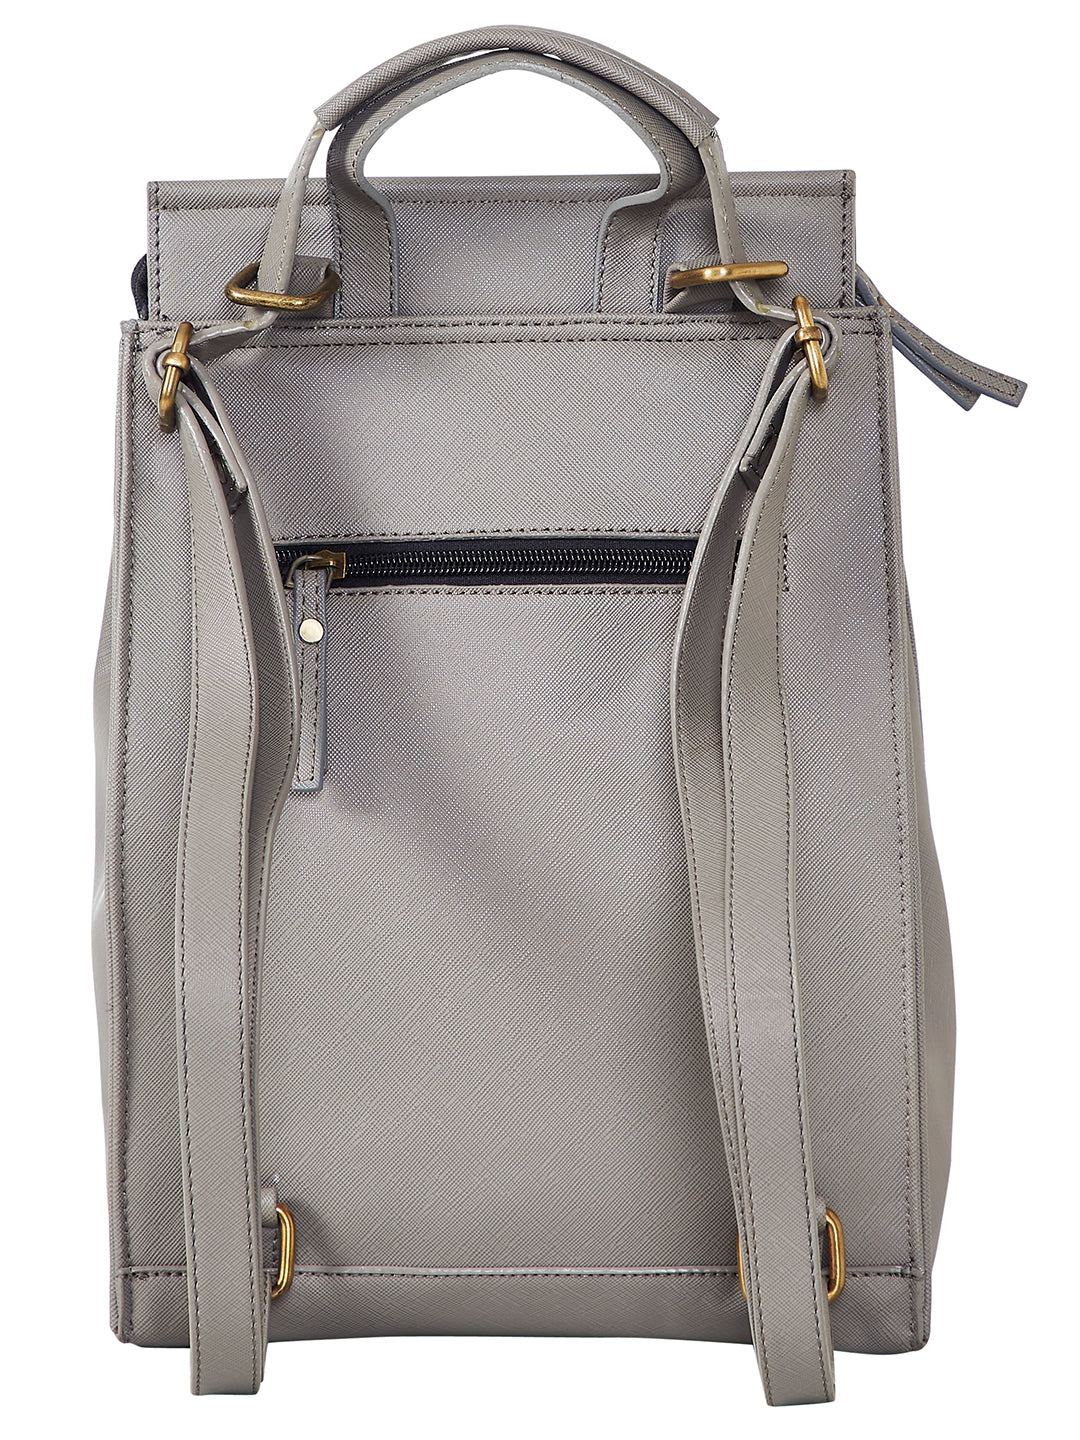 Mona B Convertible Daypack for Offices Schools and Colleges with Stylish Design for Women: Storm